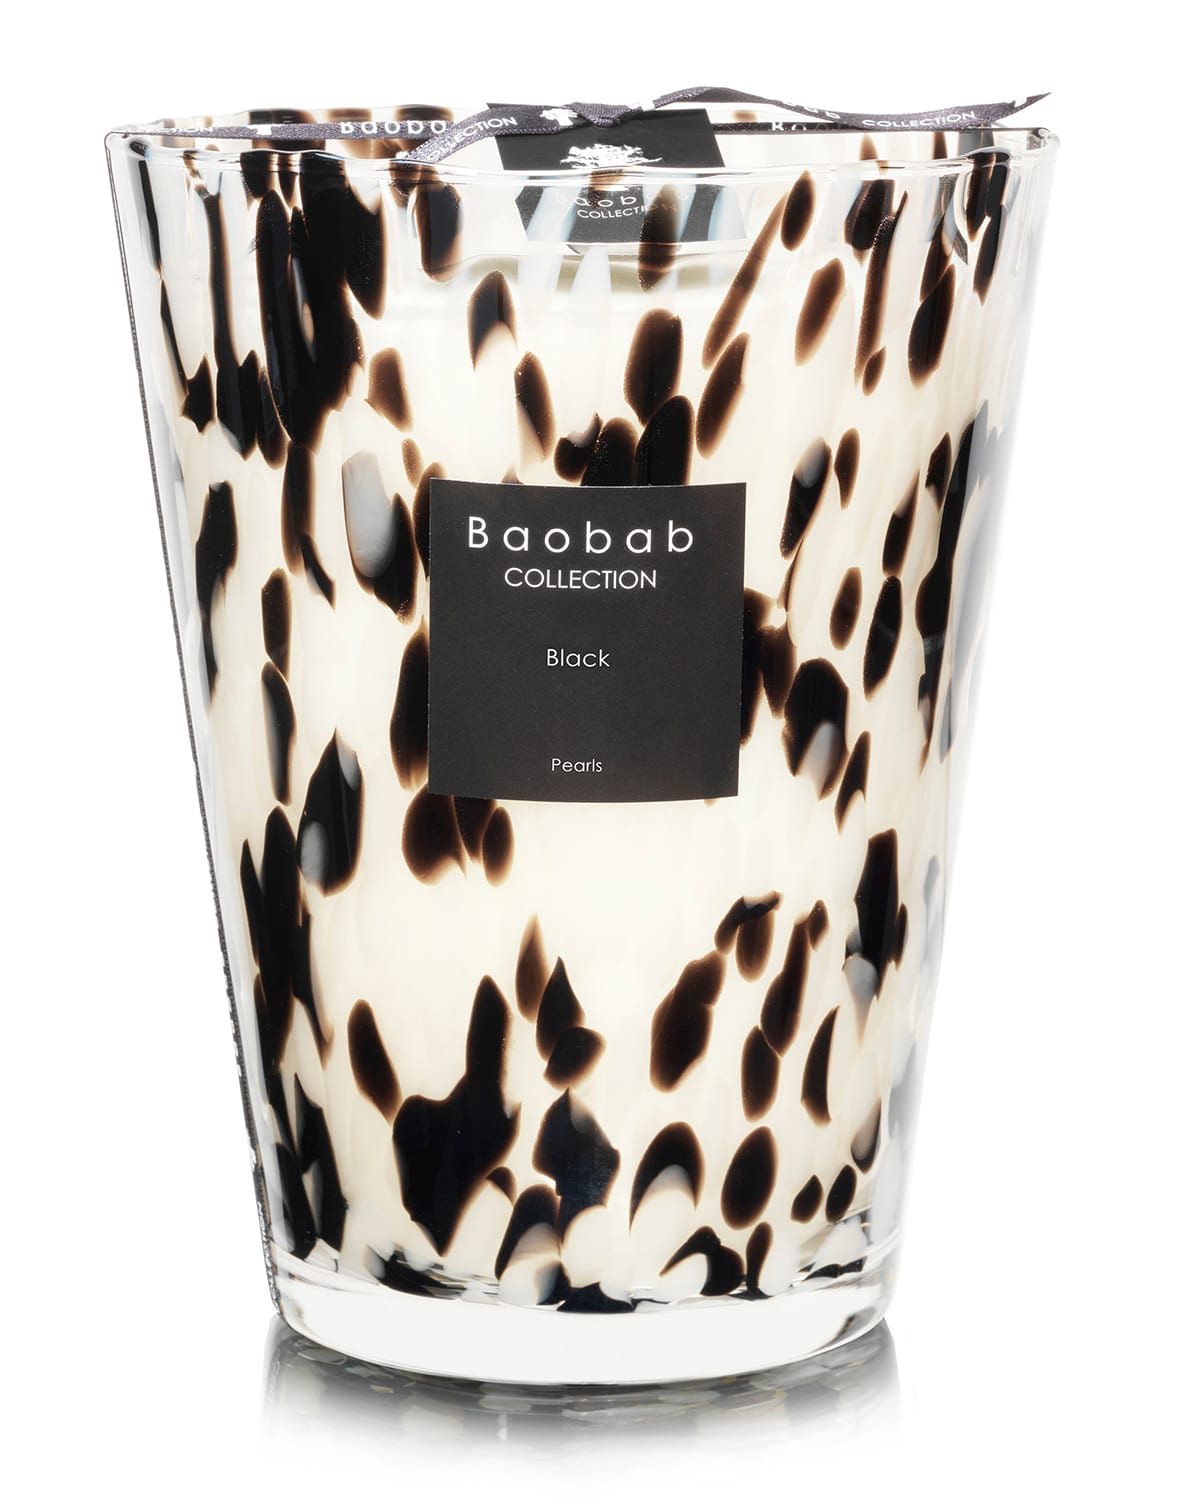 Baobab Collection Black Pearls Scented Candle, 9.4" In Black/white